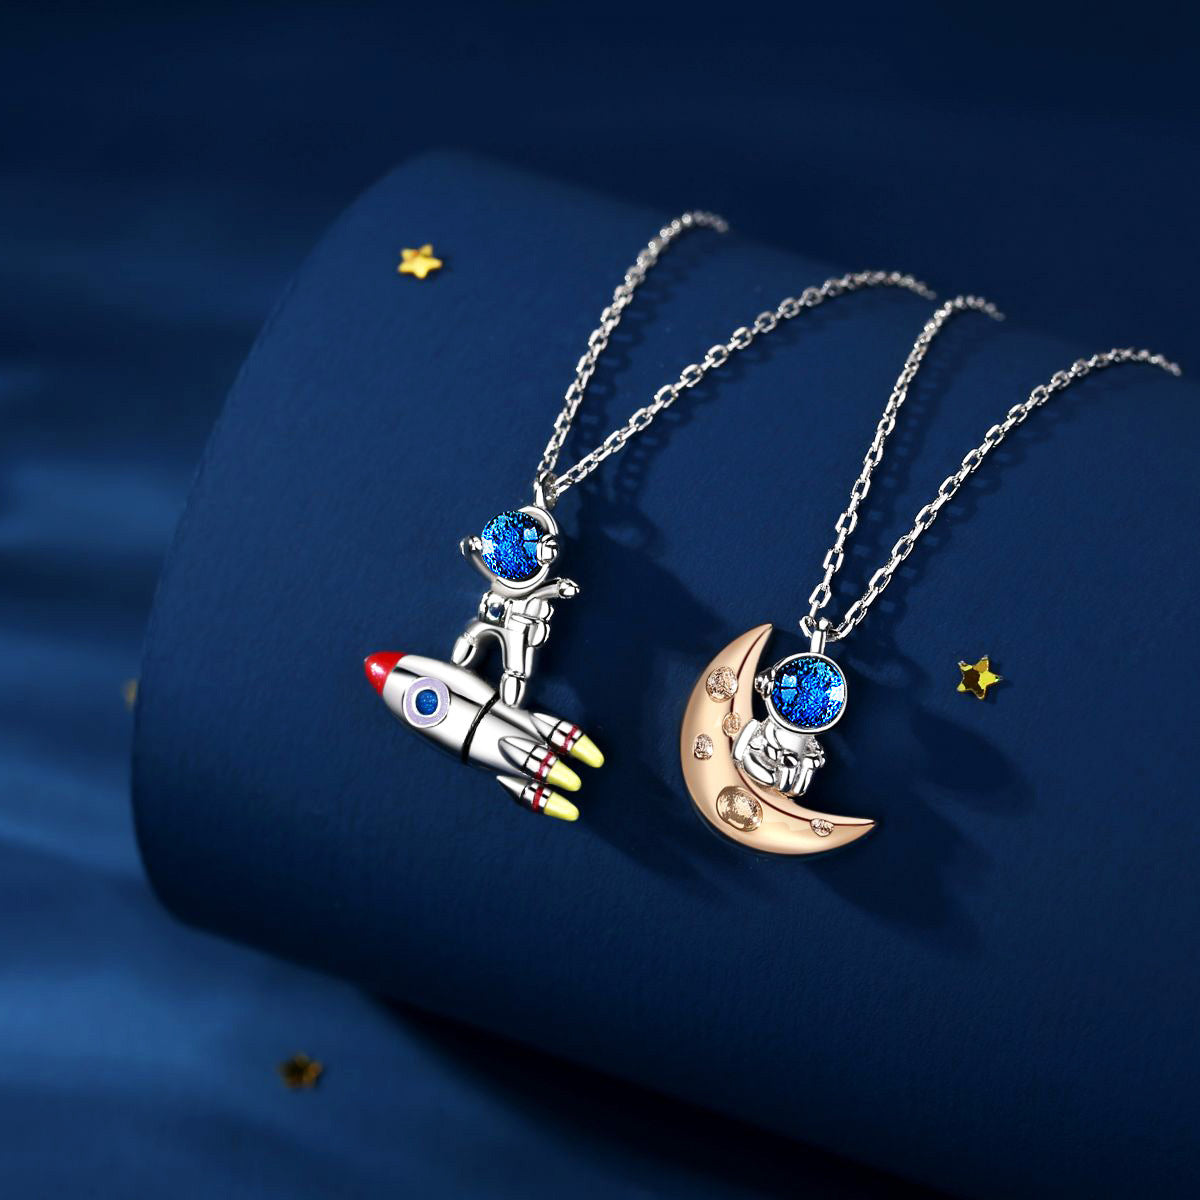 Matching Necklaces for Couples - Cute Astronaut Relationship Necklaces –  Chimatch